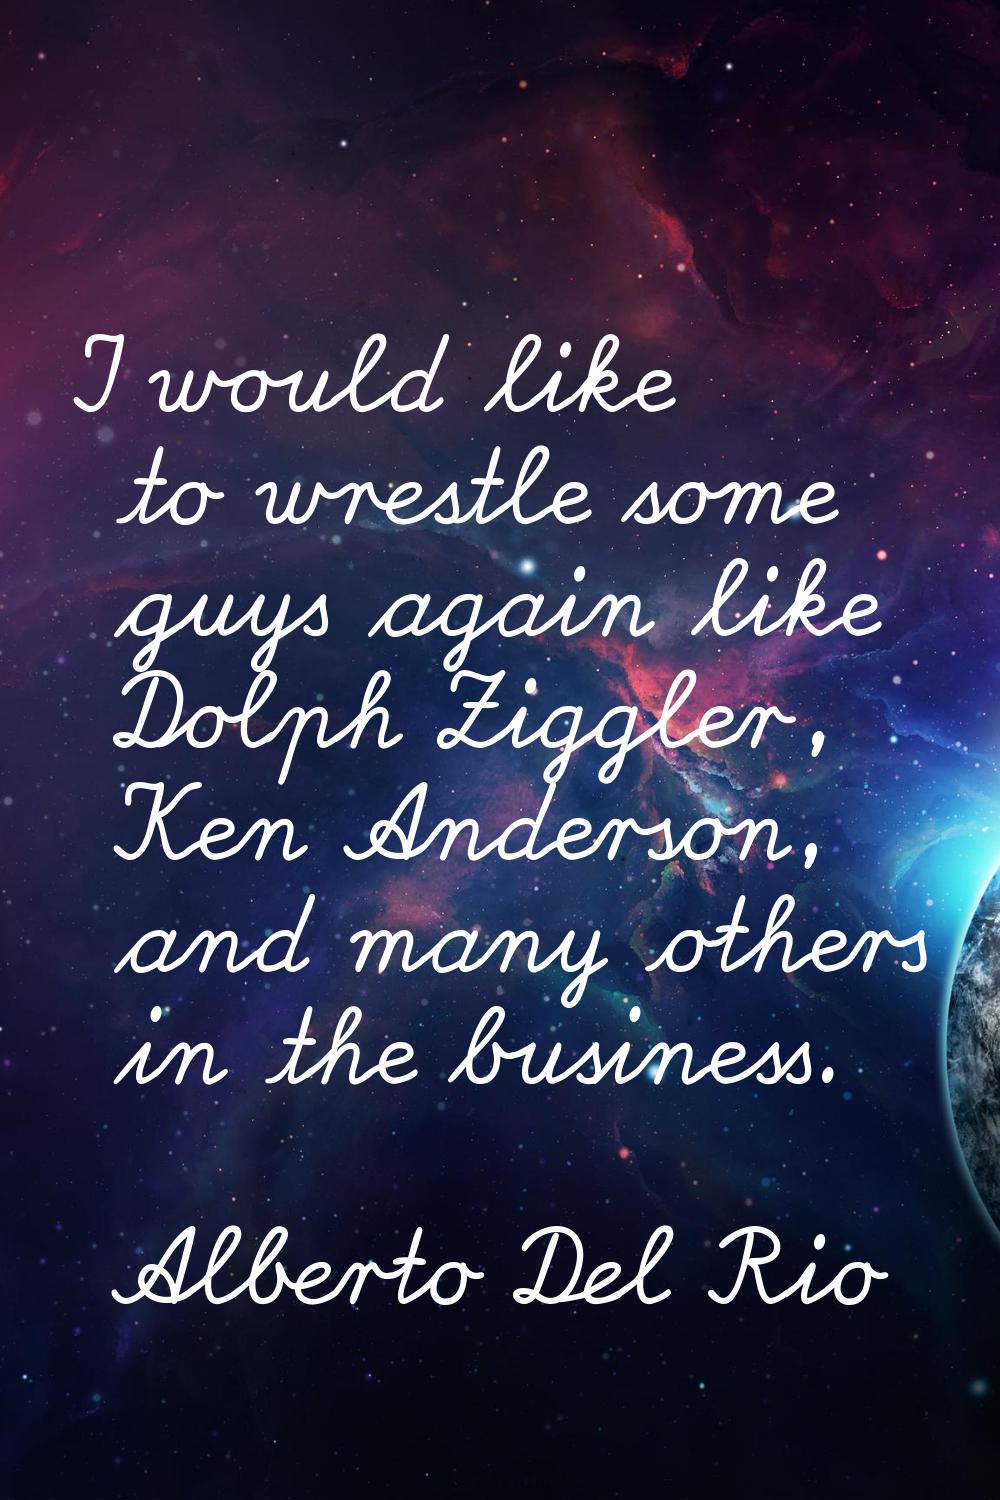 I would like to wrestle some guys again like Dolph Ziggler, Ken Anderson, and many others in the bu